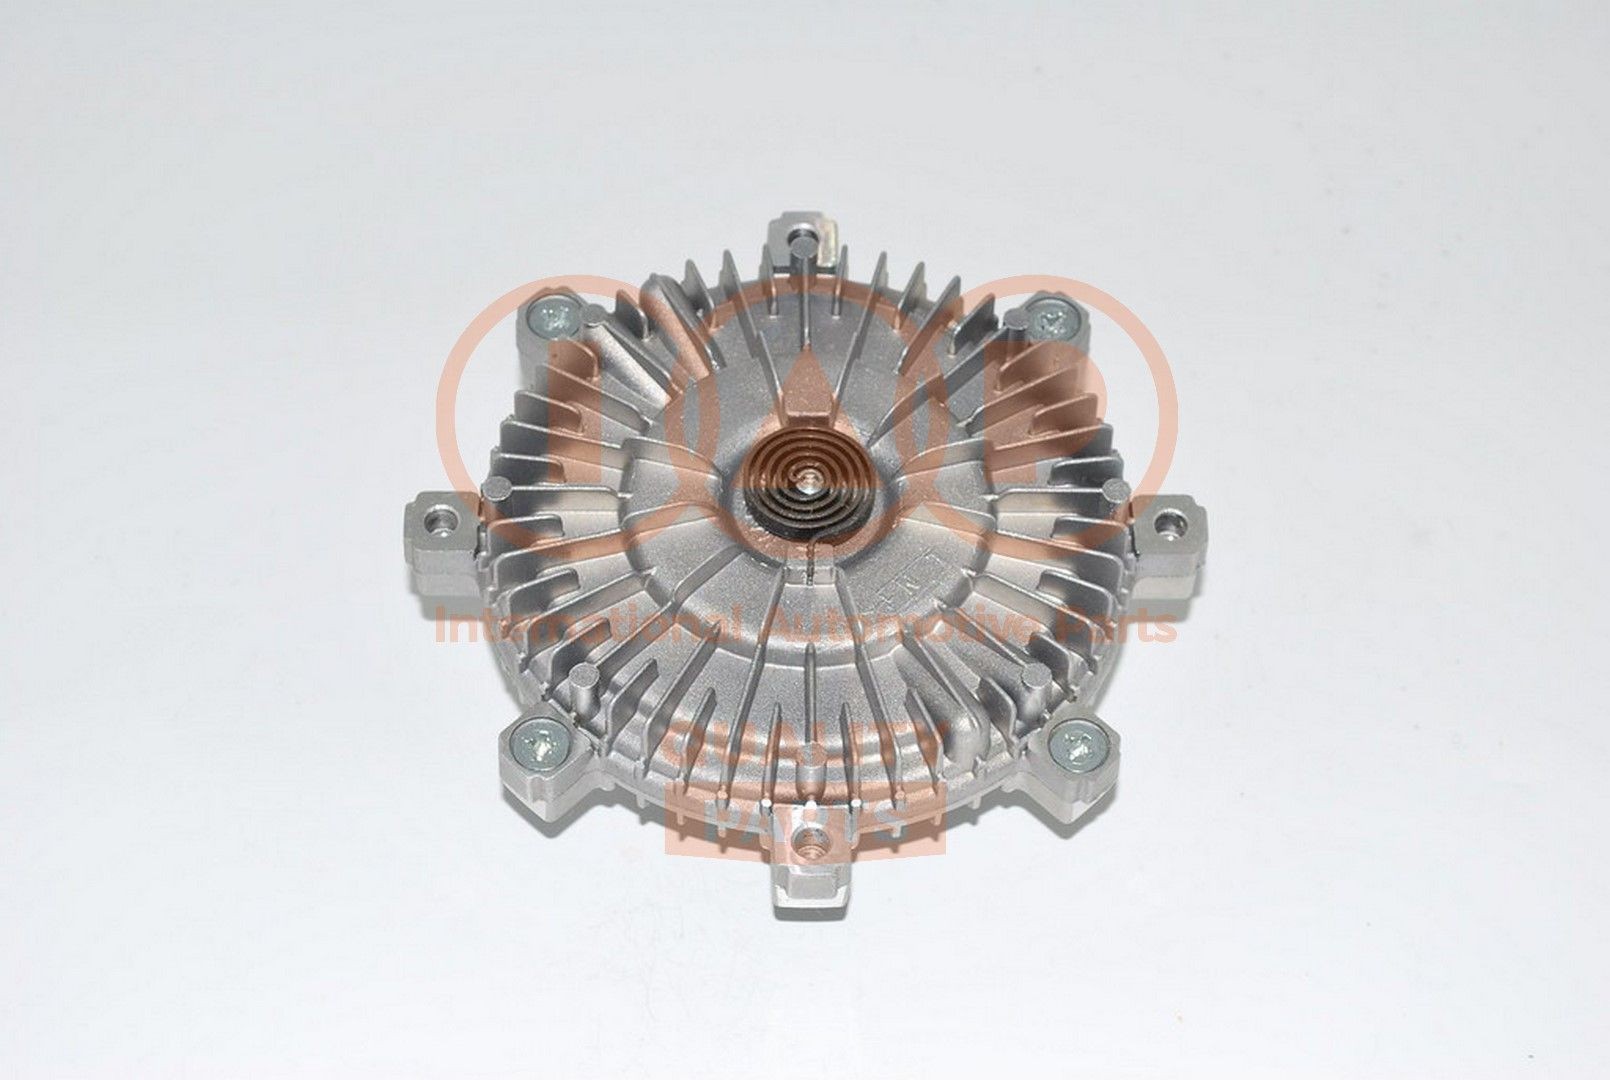 Original 151-07063 IAP QUALITY PARTS Fan clutch experience and price